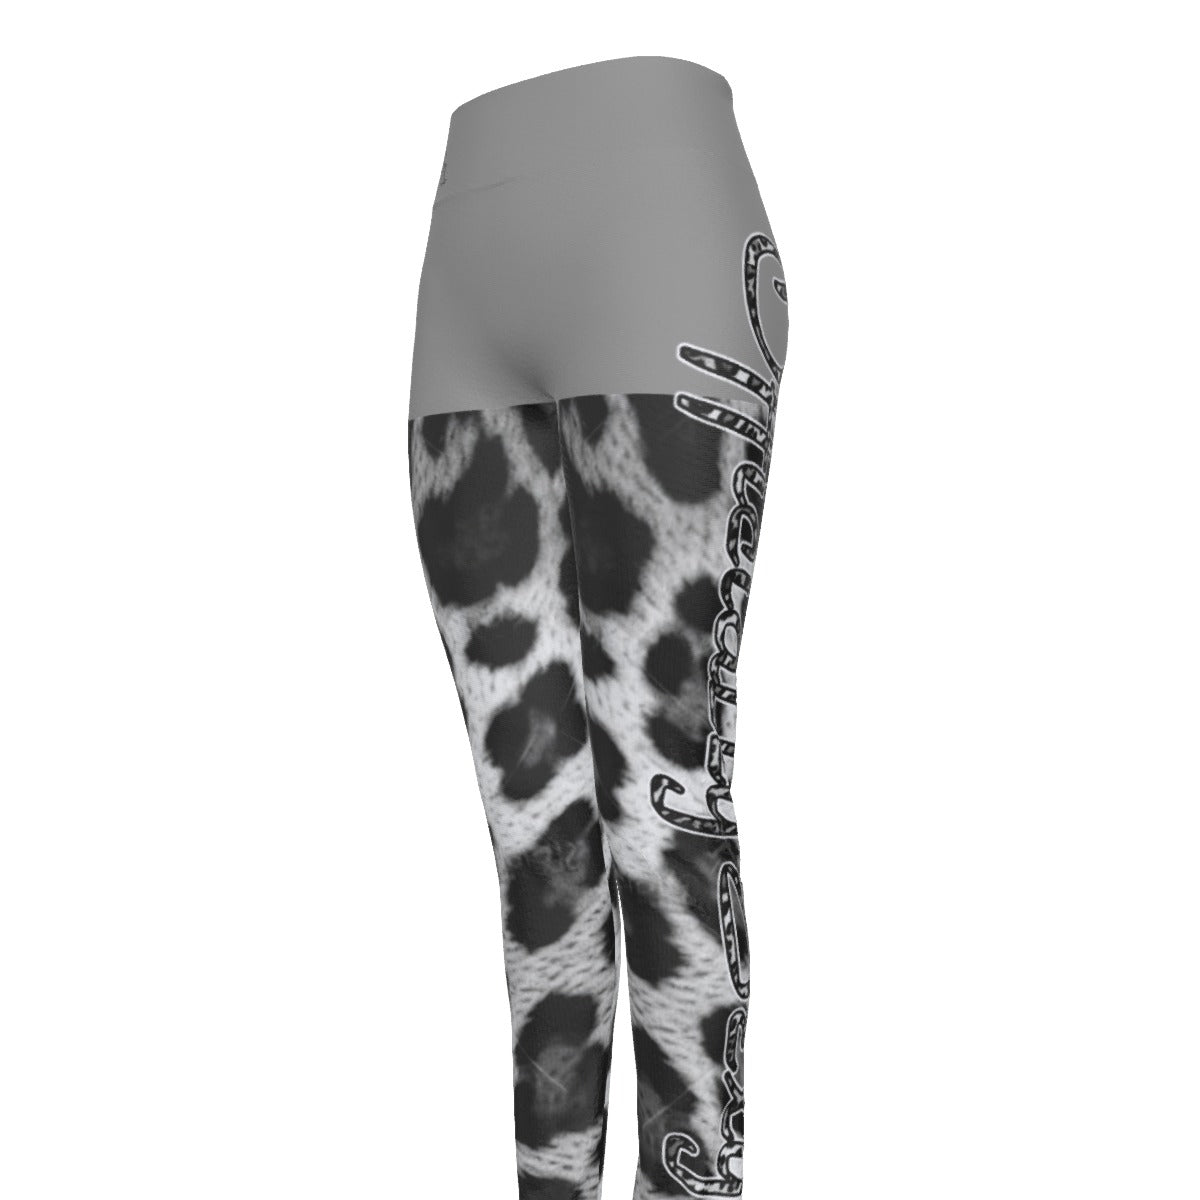 Officially Sexy Grey Snow Leopard Print Collection Women's Grey High Waist Booty Popper Leggings #2 (English) 4